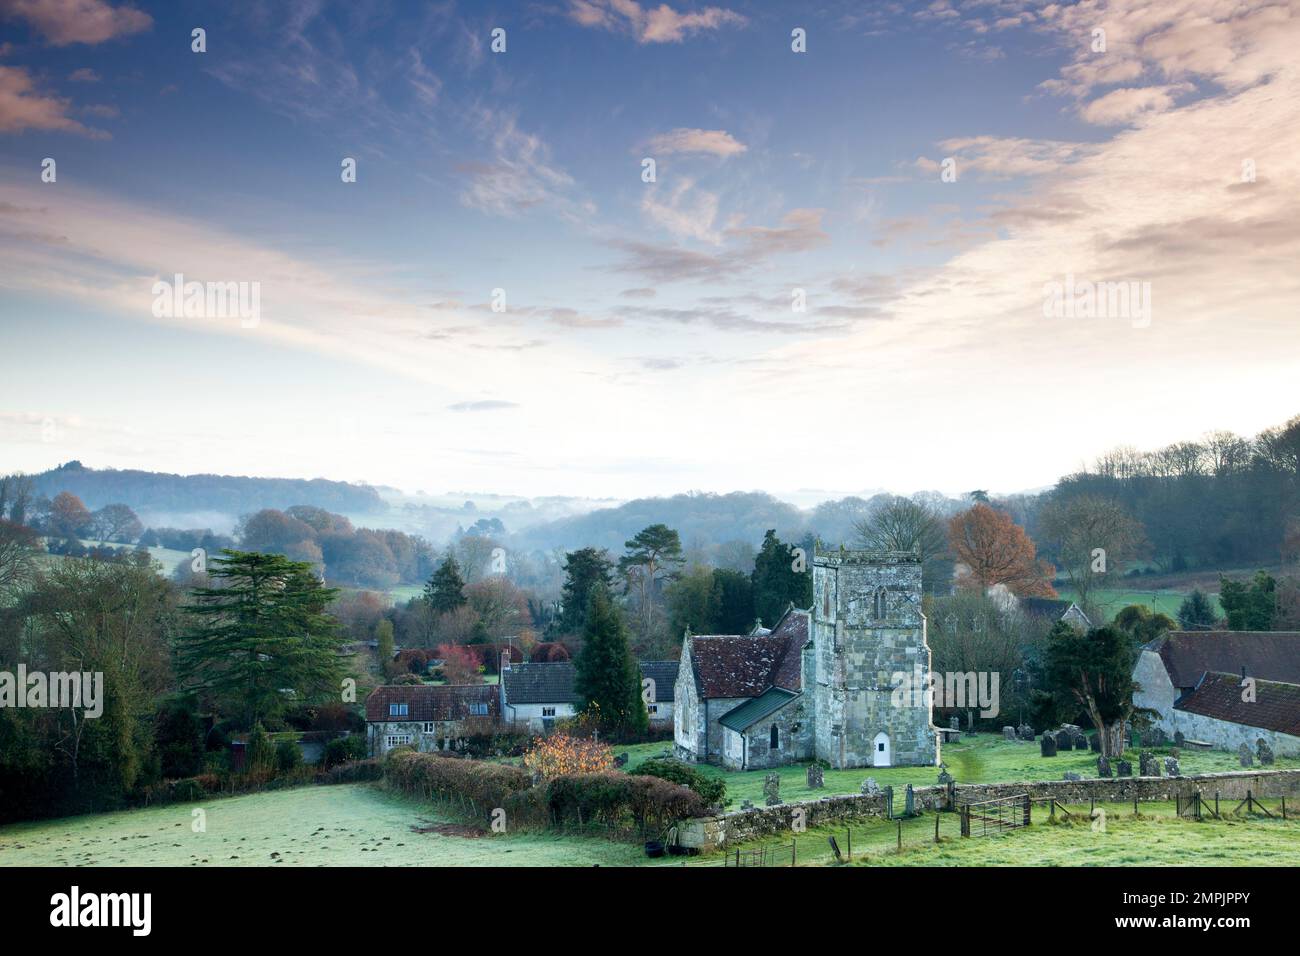 All Saints Church in the village of Sutton Mandeville in Wiltshire. Stock Photo